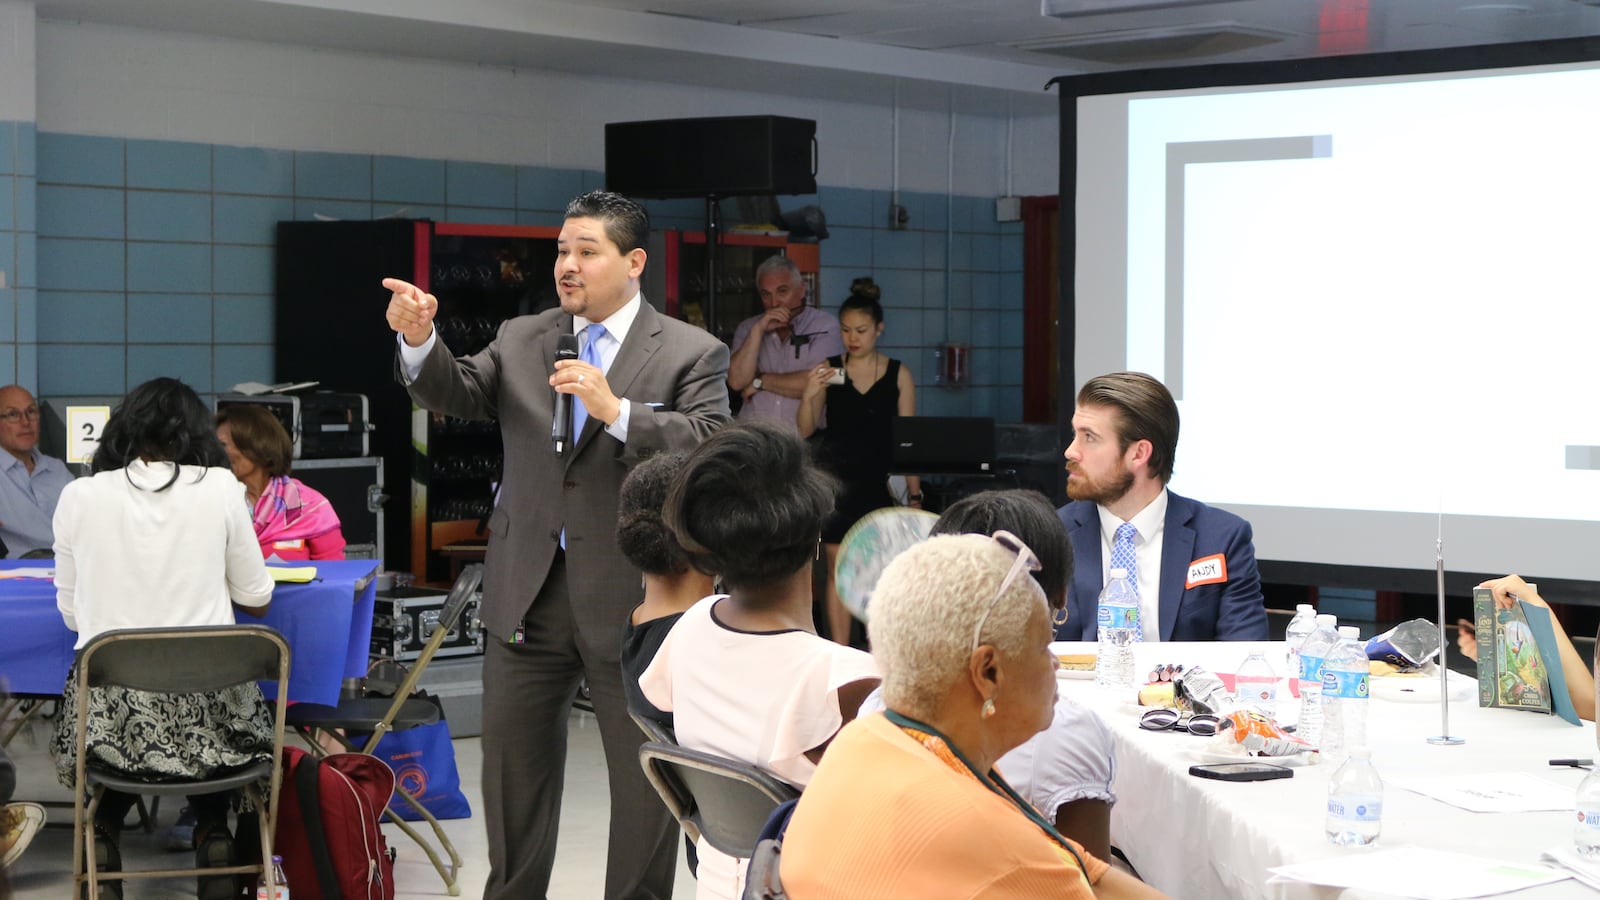 Chancellor Richard Carranza gave a speech to parents, educators, and community advocates about the need to integrate schools. They were gathered in Harlem for a town hall organized by Mayor Bill de Blasio's School Diversity Advisory Group.